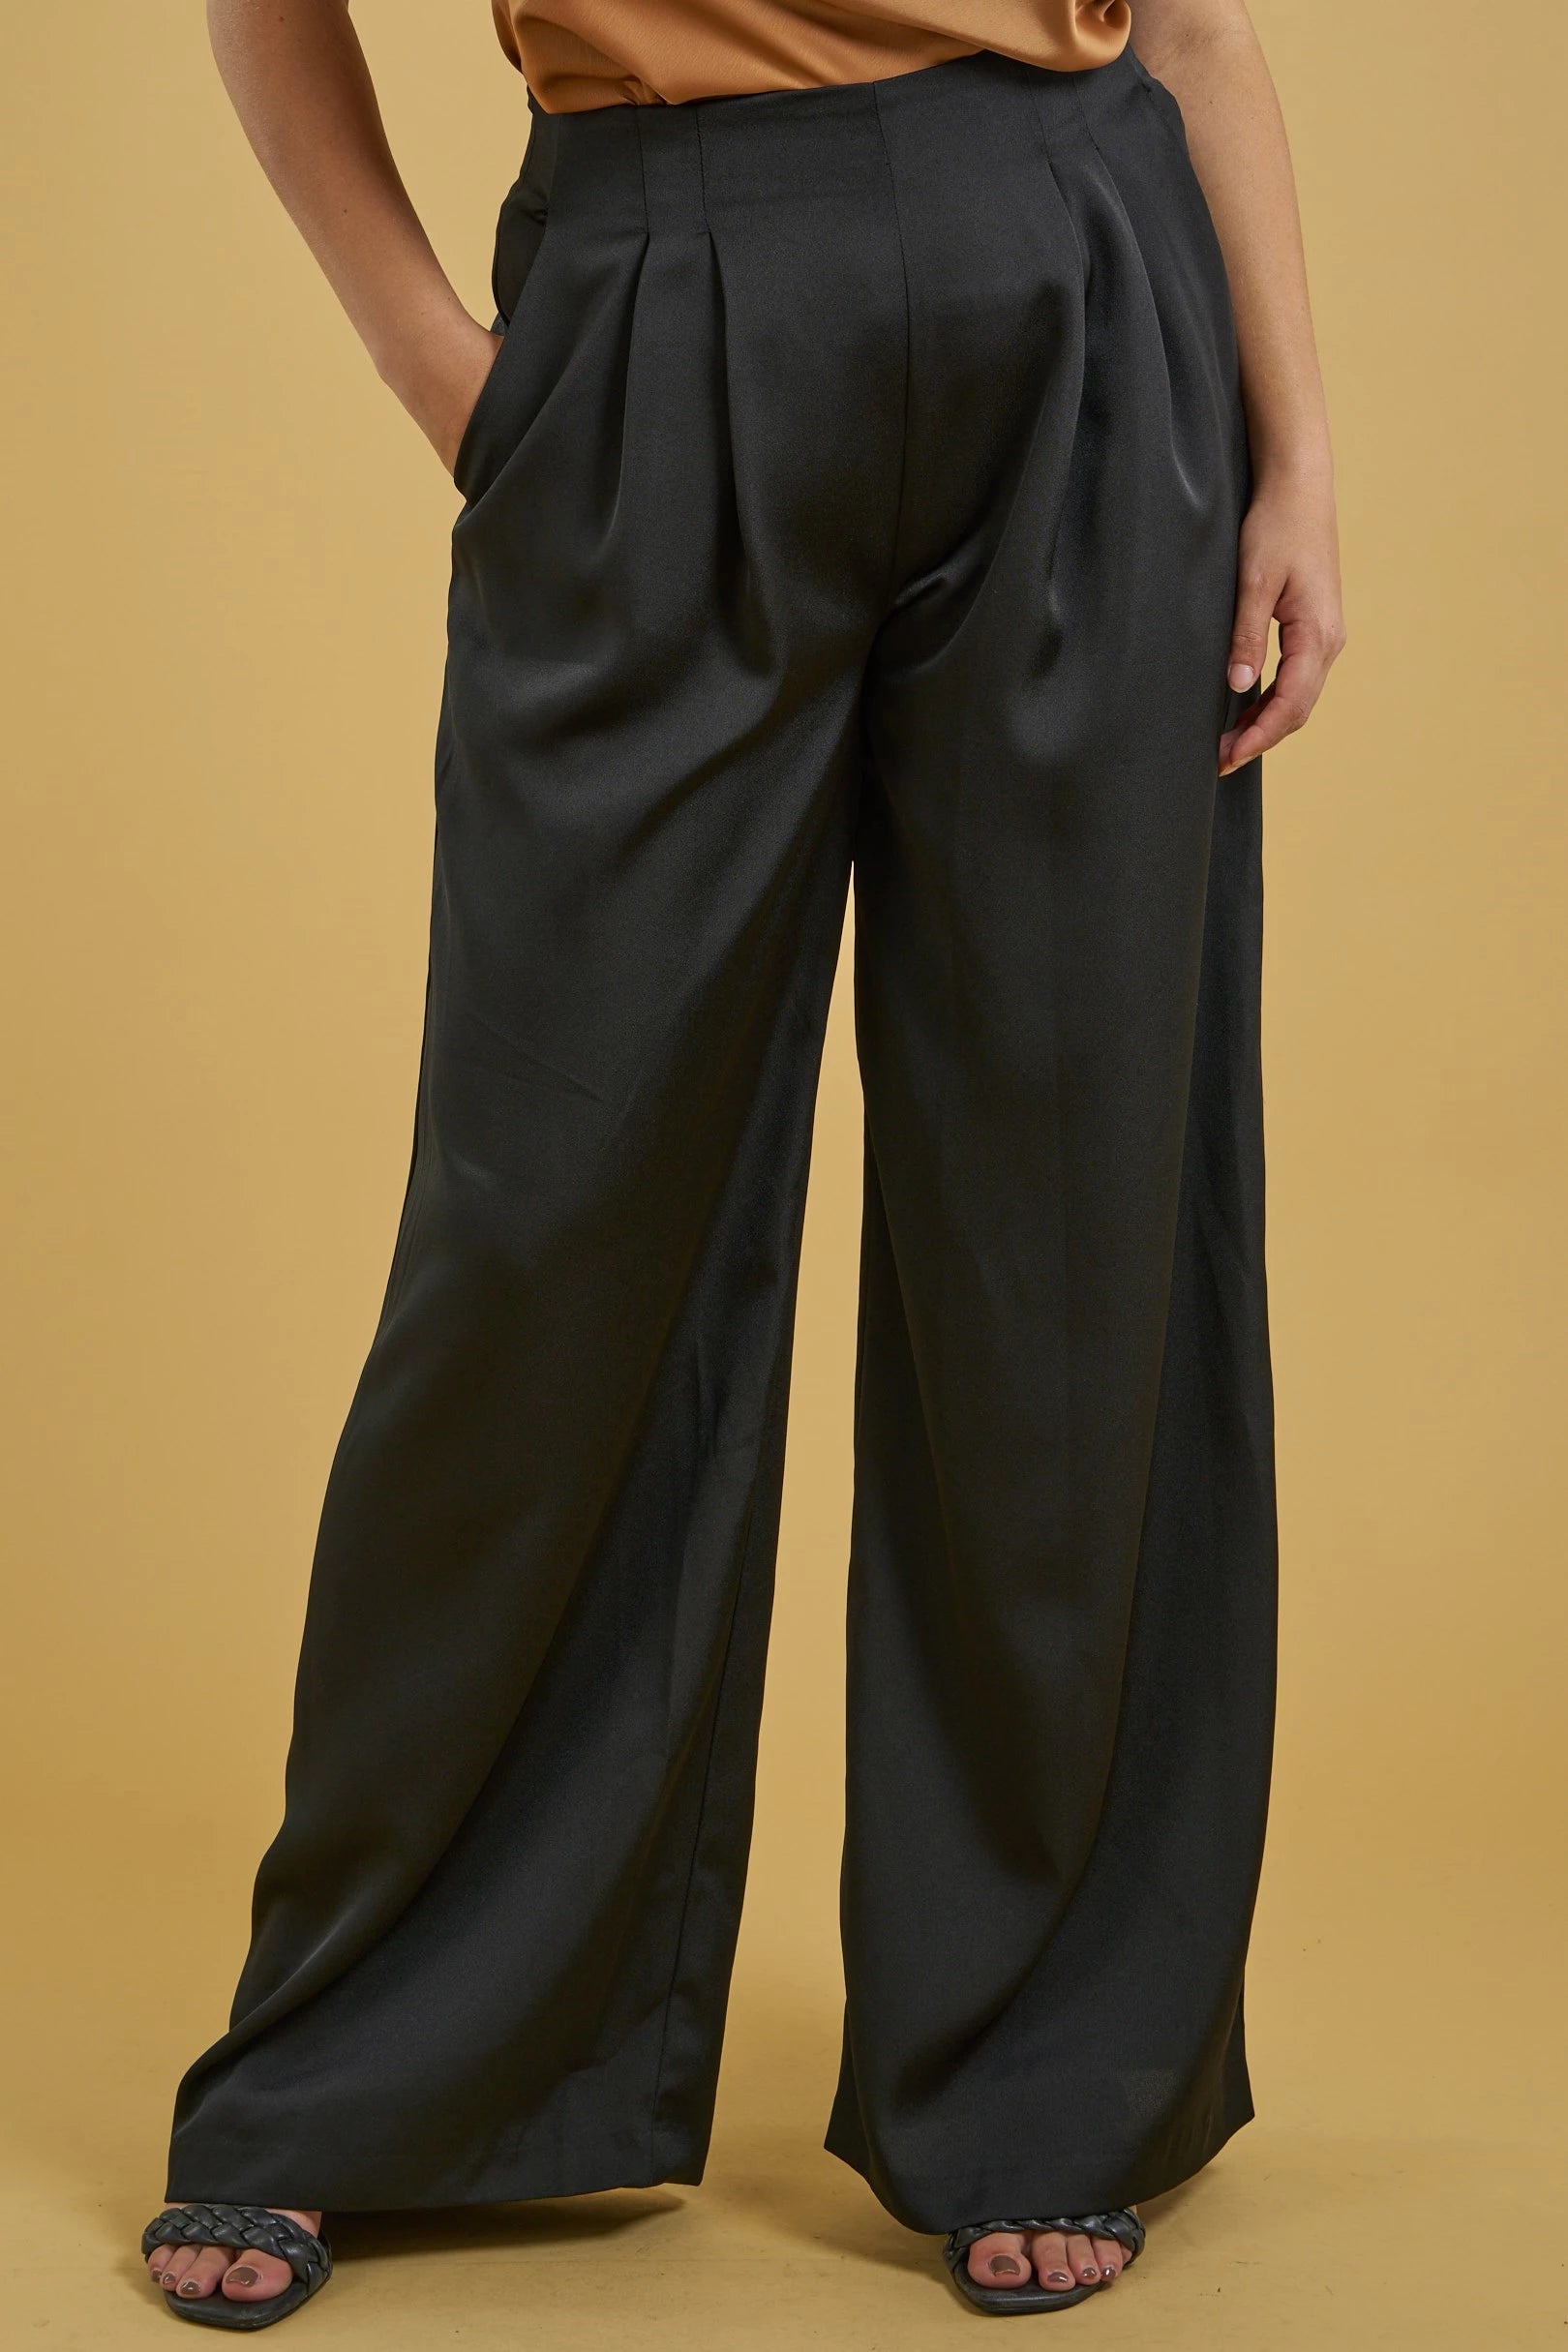 PLUS satin high waist pleated wide leg pant - RK Collections Boutique